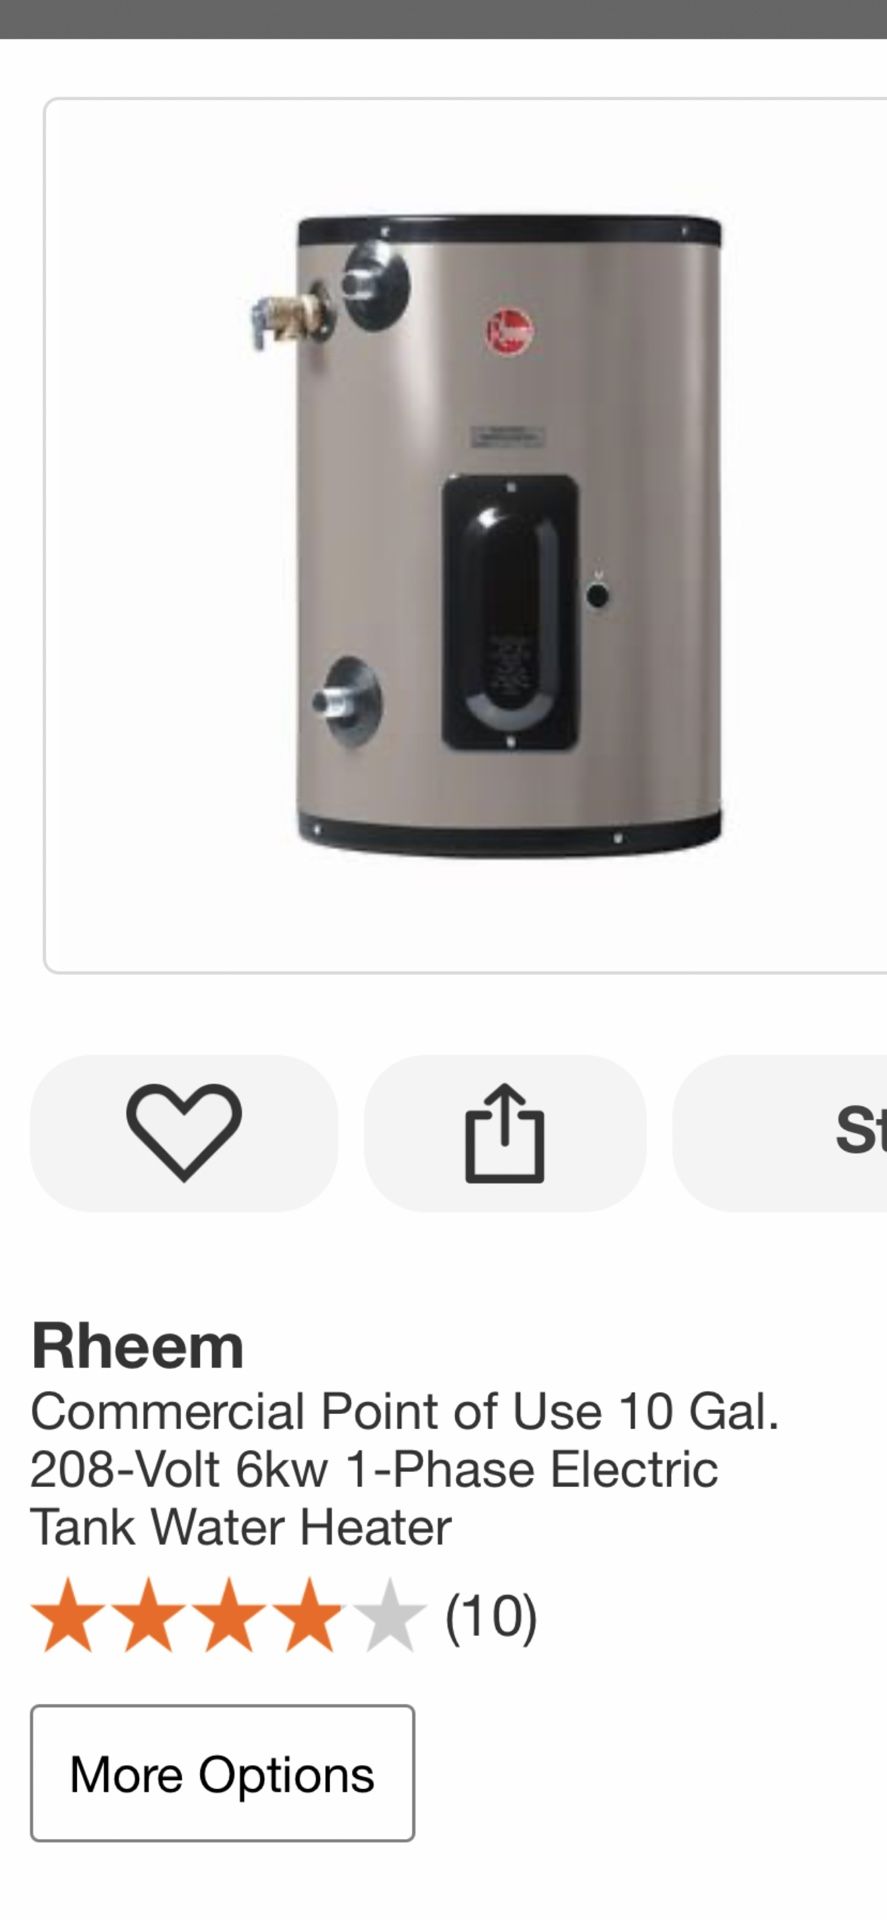 Rheem Commercial Point of Use 10 Gal. 208-Volt 6kw 1-Phase Electric Tank Water Heater (10)and Many More